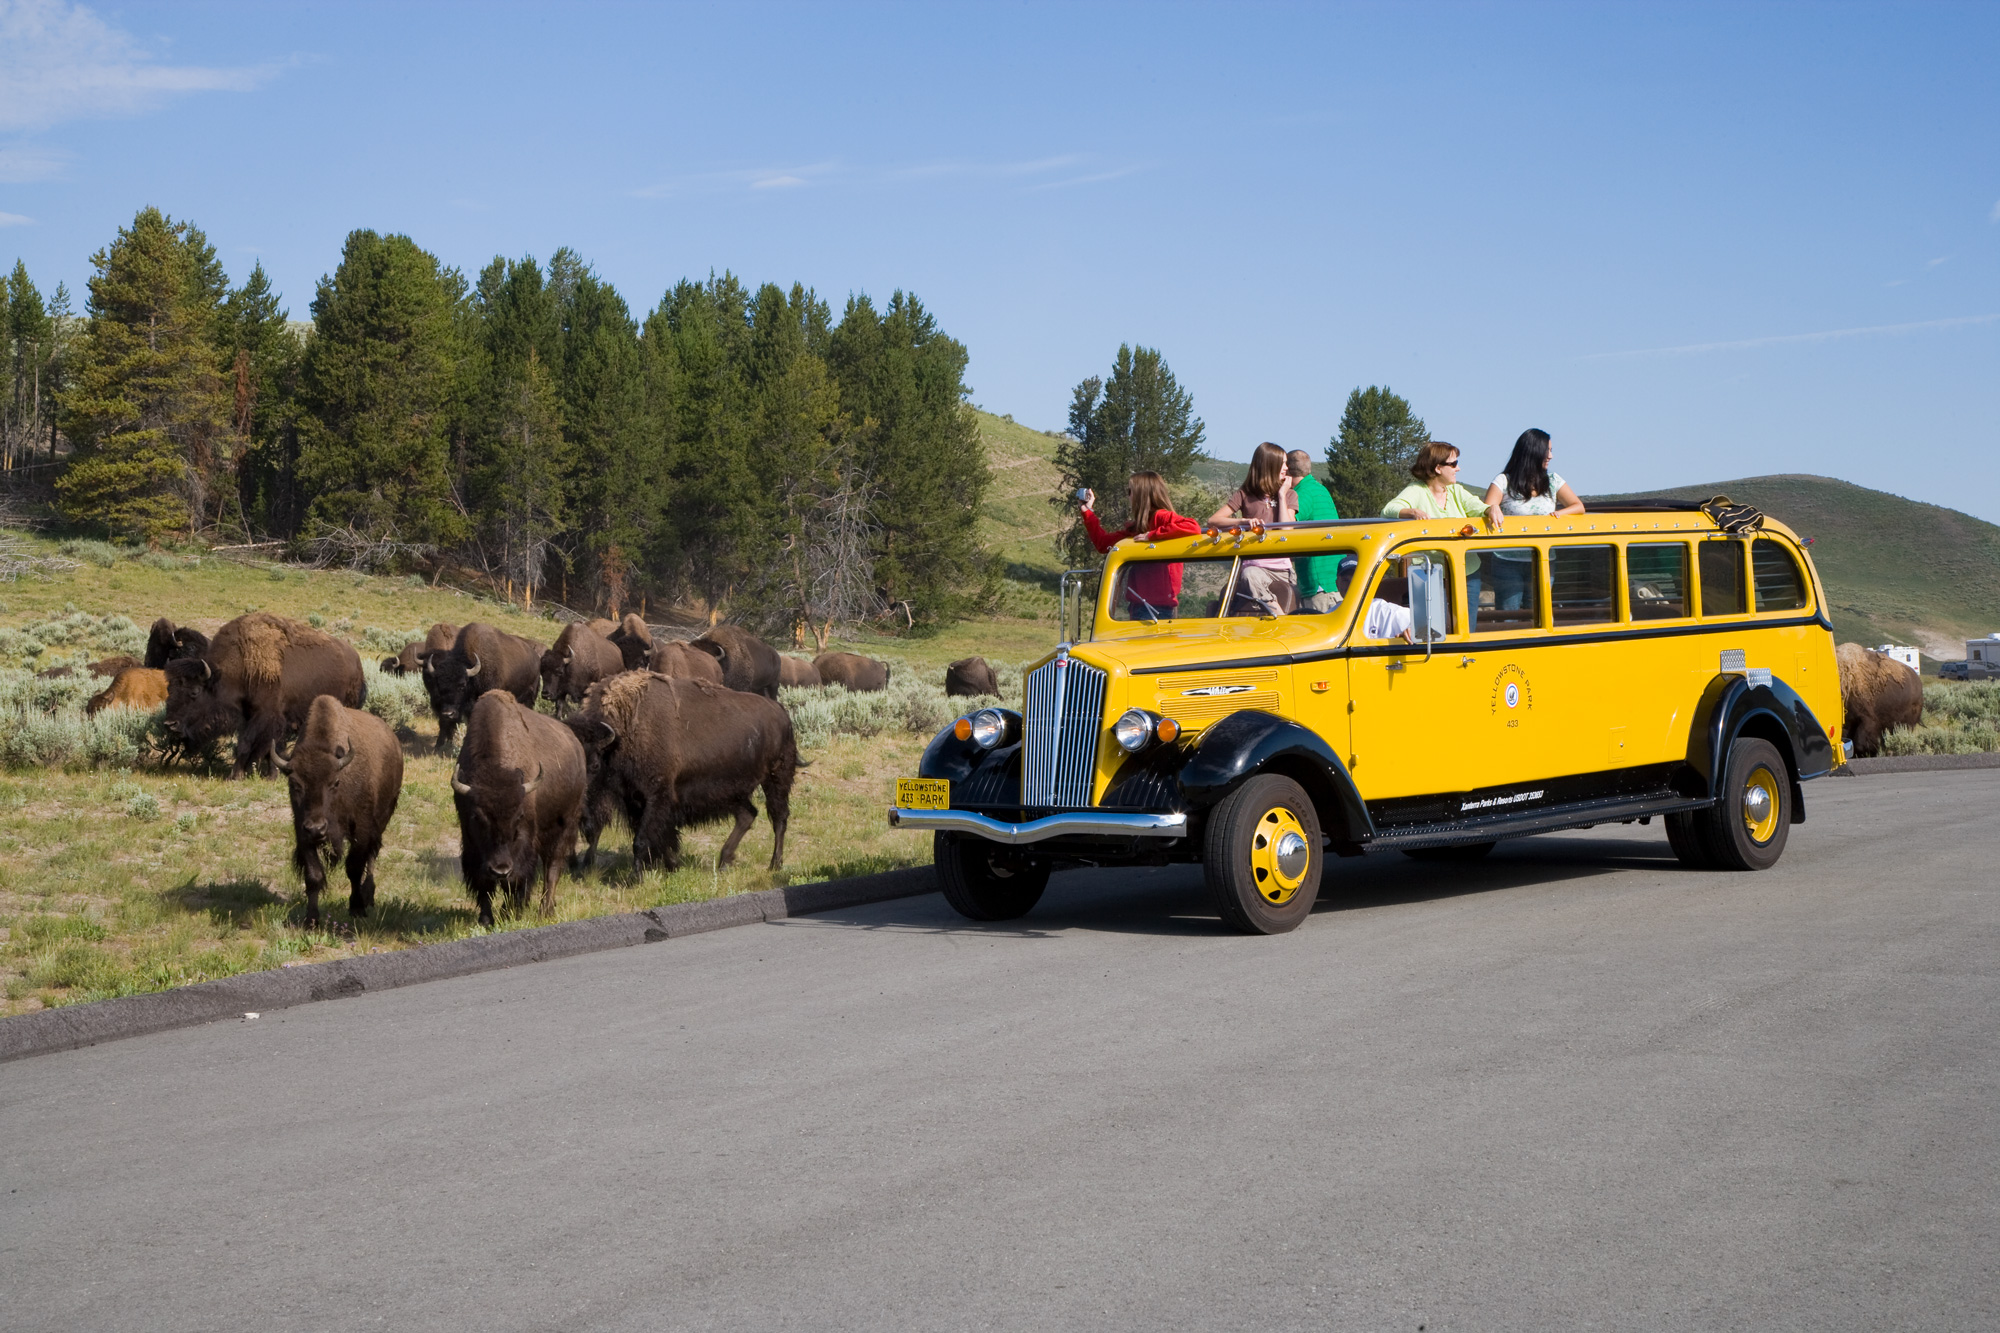 The Coolest Way to Tour by Yellowstone Historic Yellow Bus